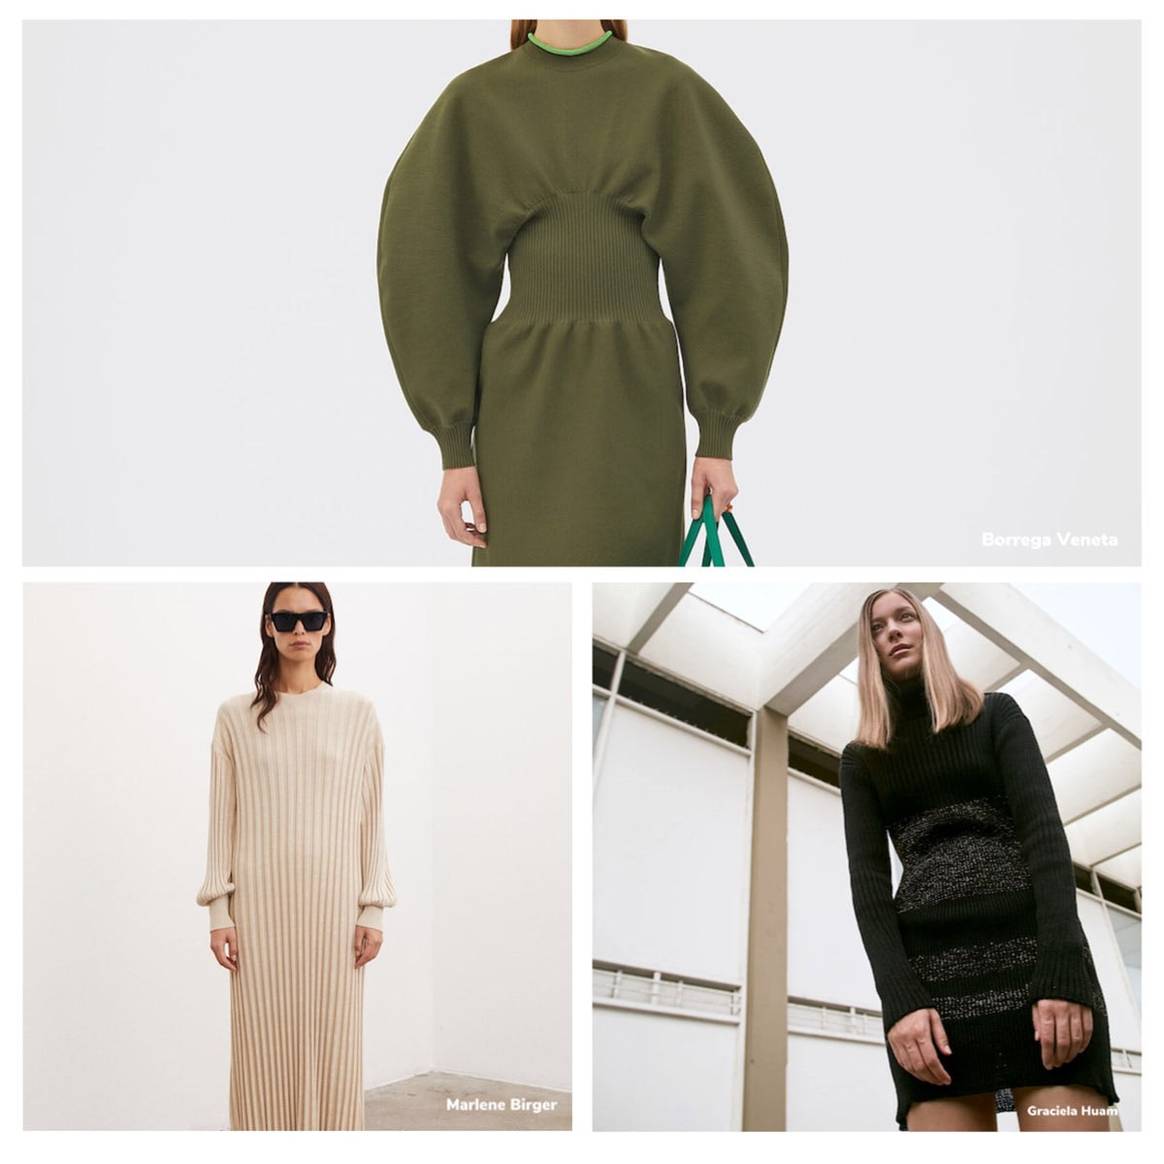 FW 2022/2023 Knit Trends Forecast